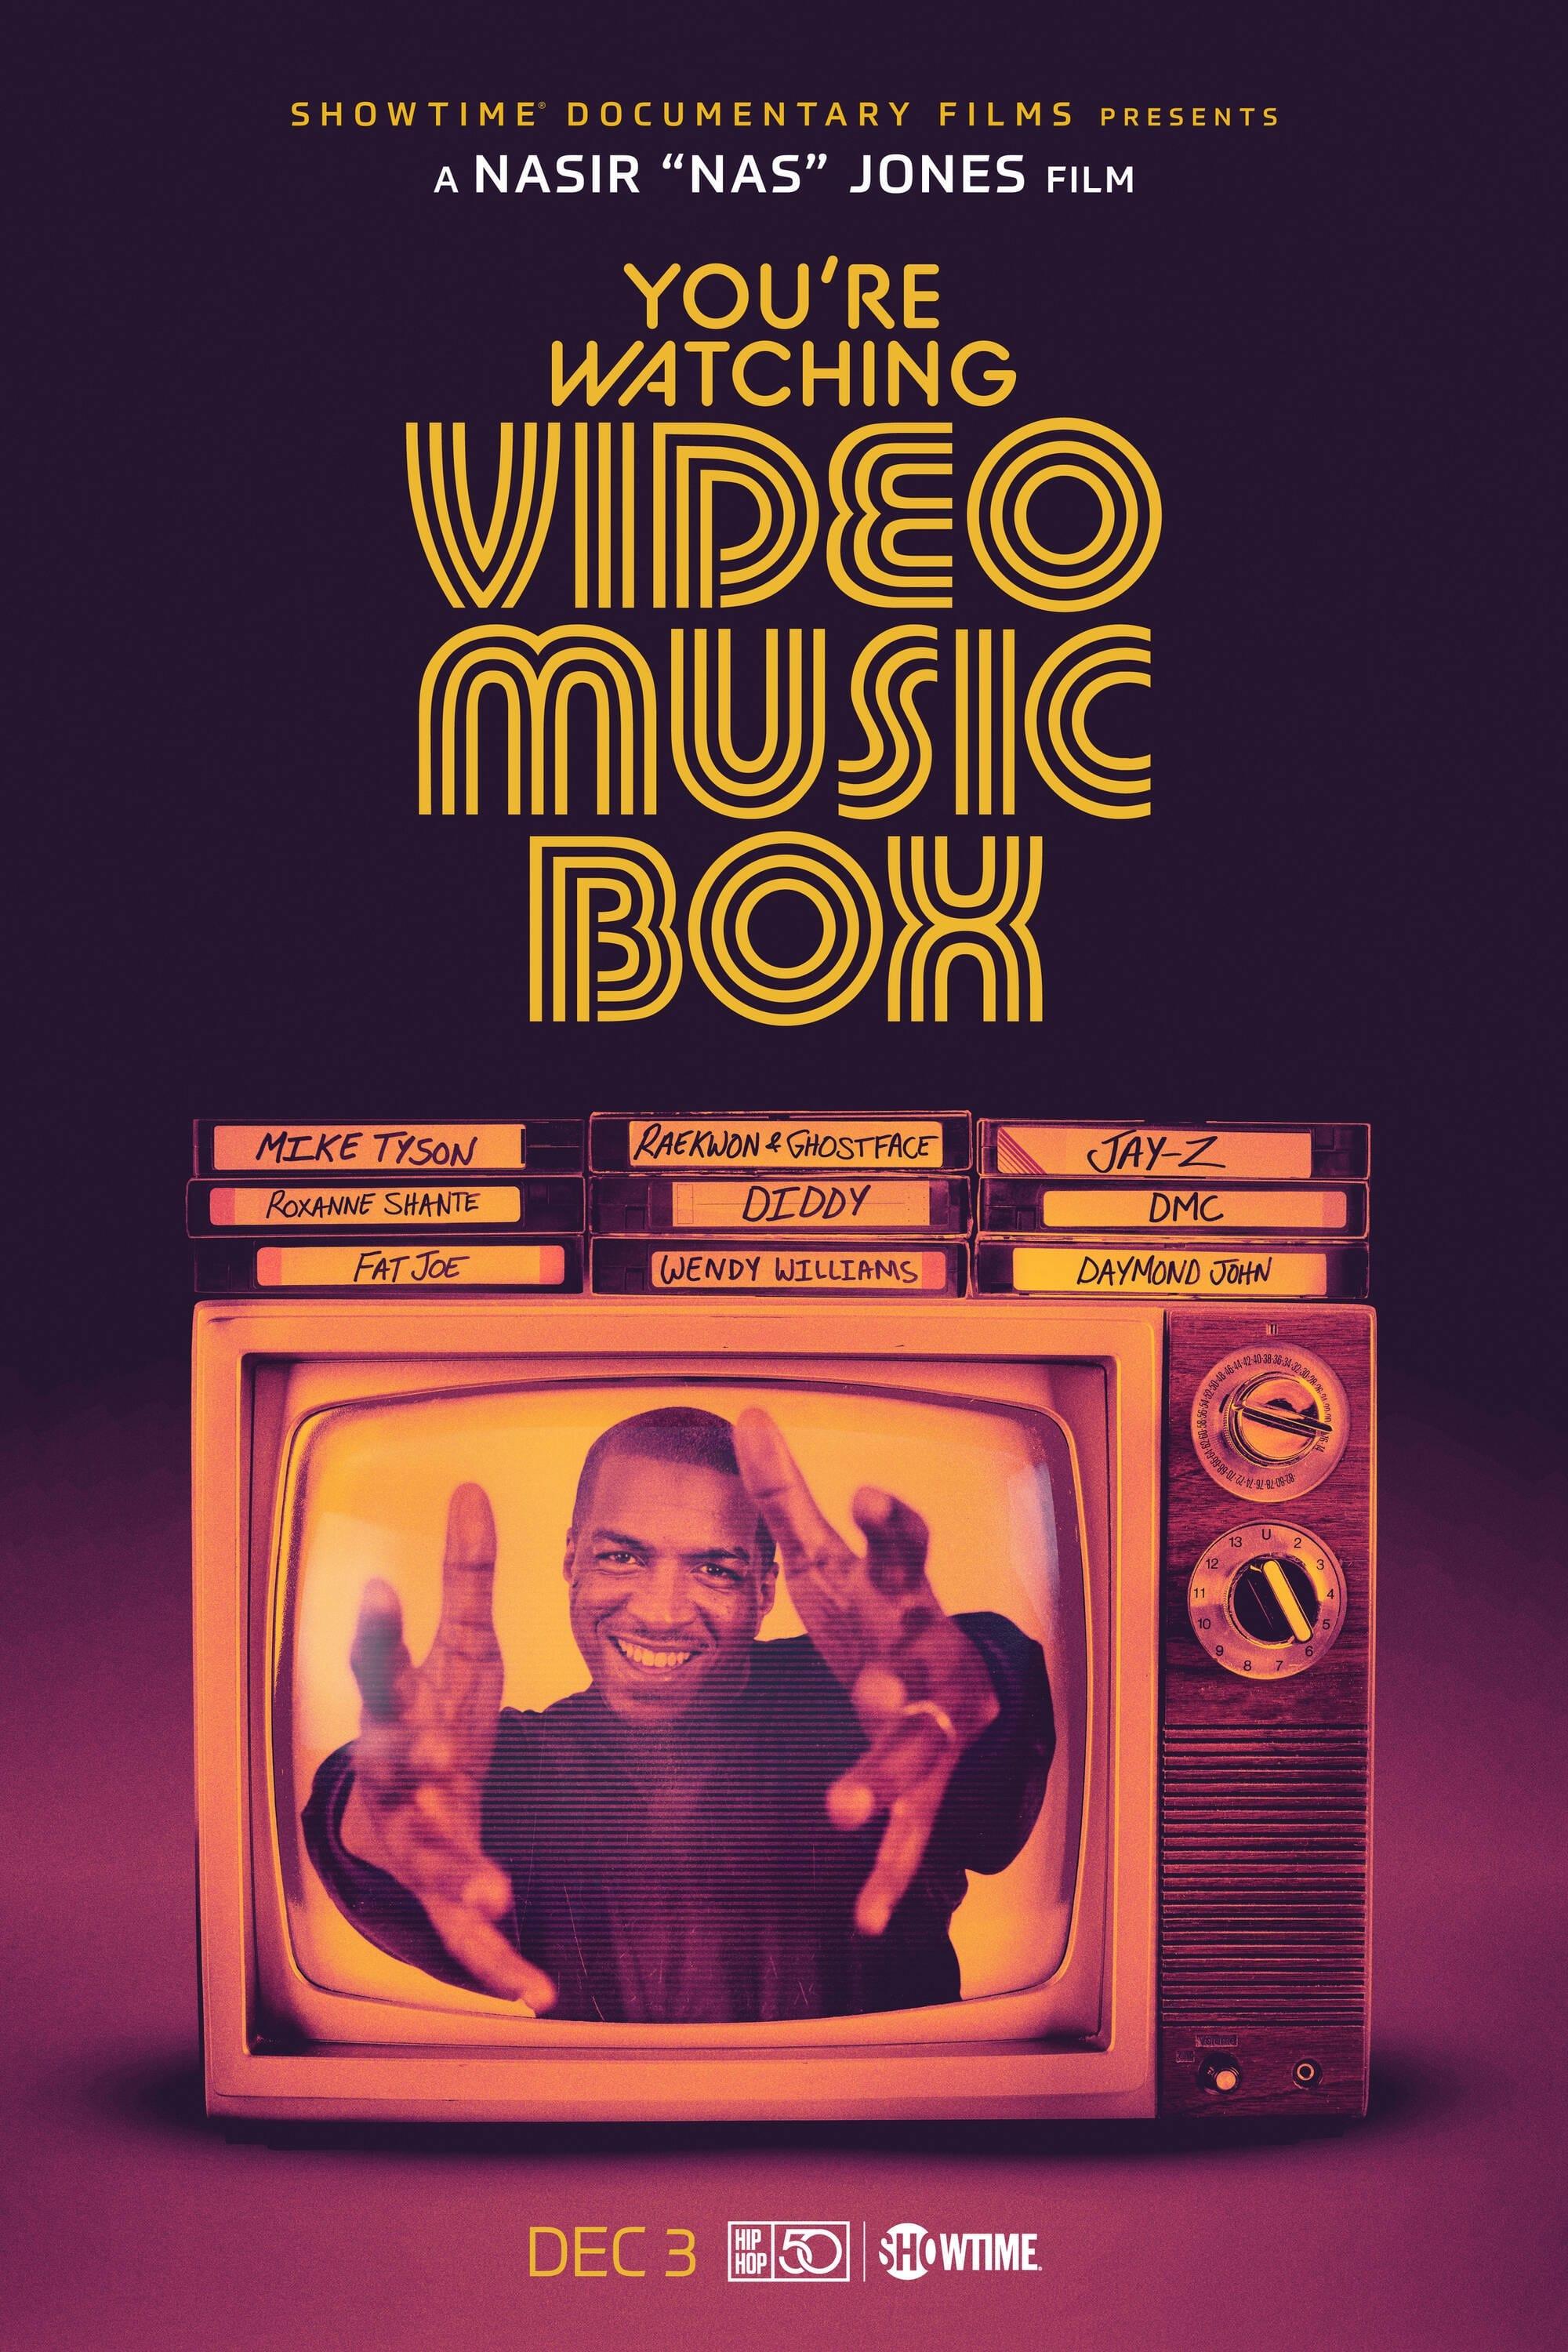 You're Watching Video Music Box poster